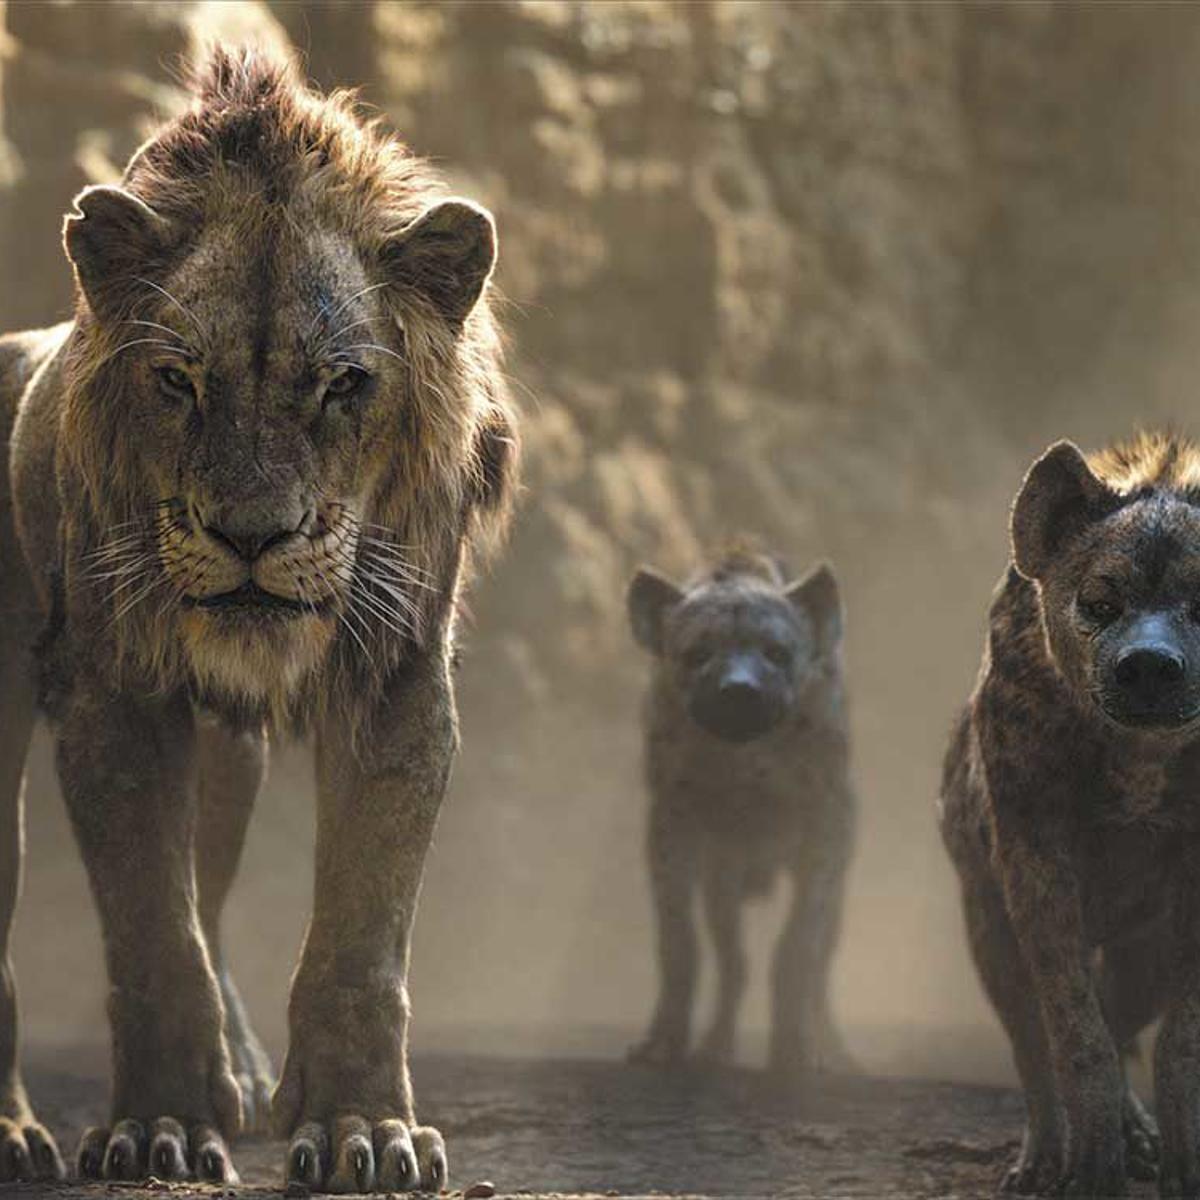 The Lion King | Movie Times + Reviews 